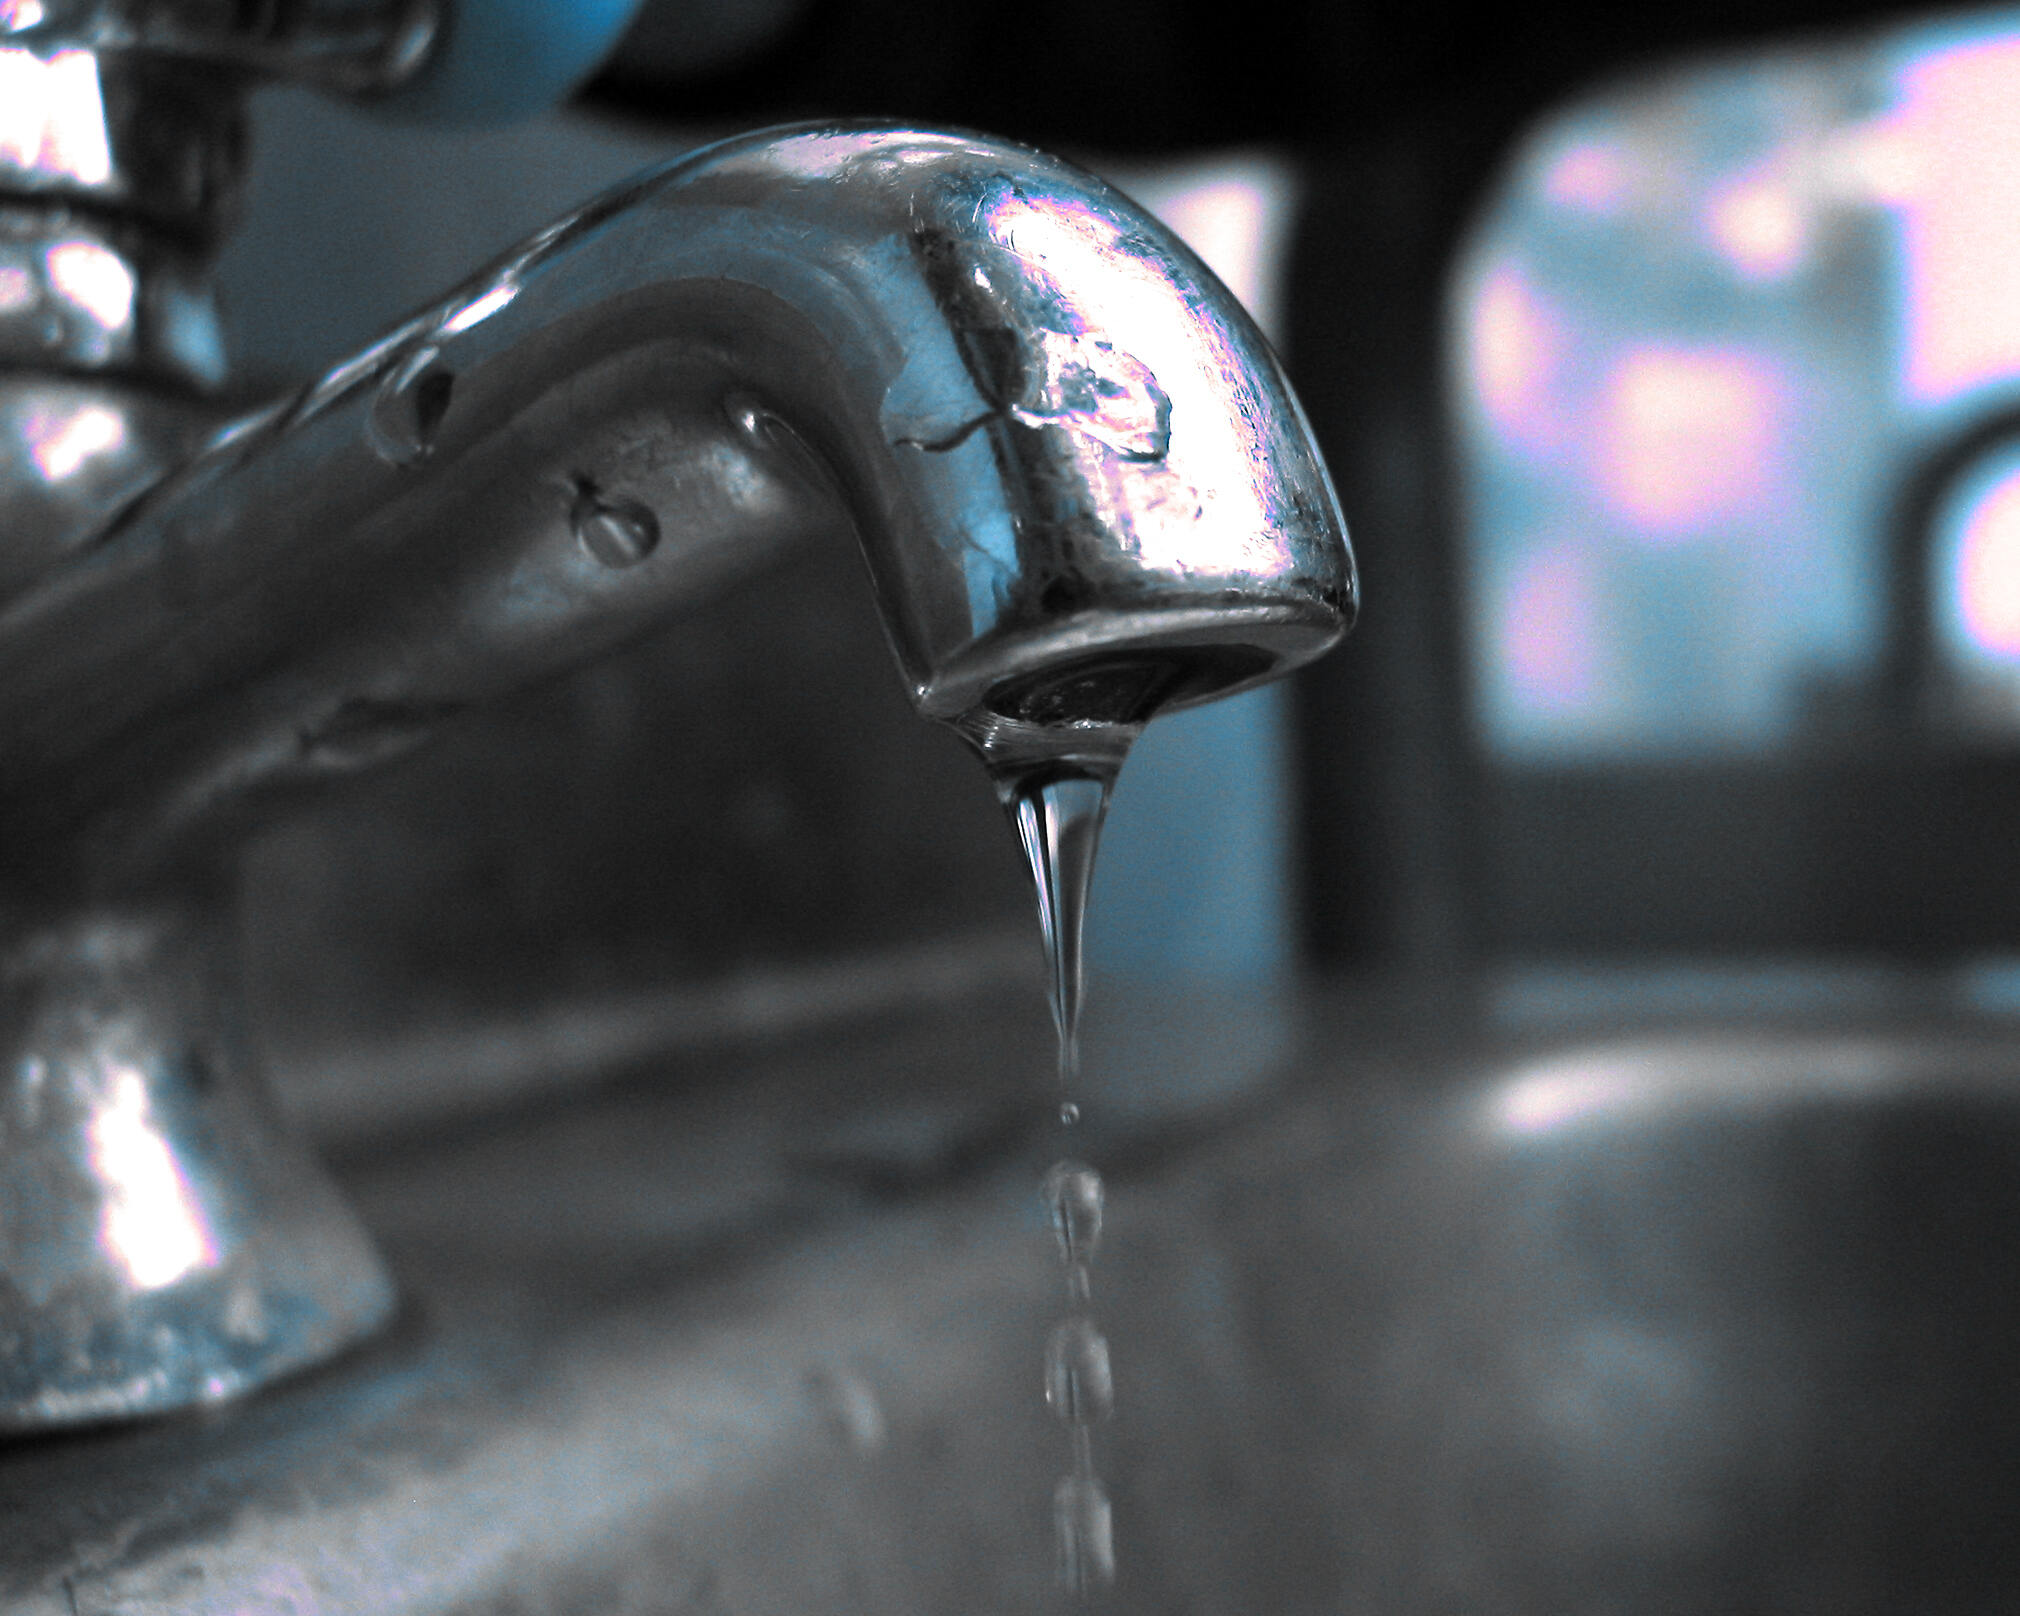 How Much Water Does A Leaking Faucet Waste